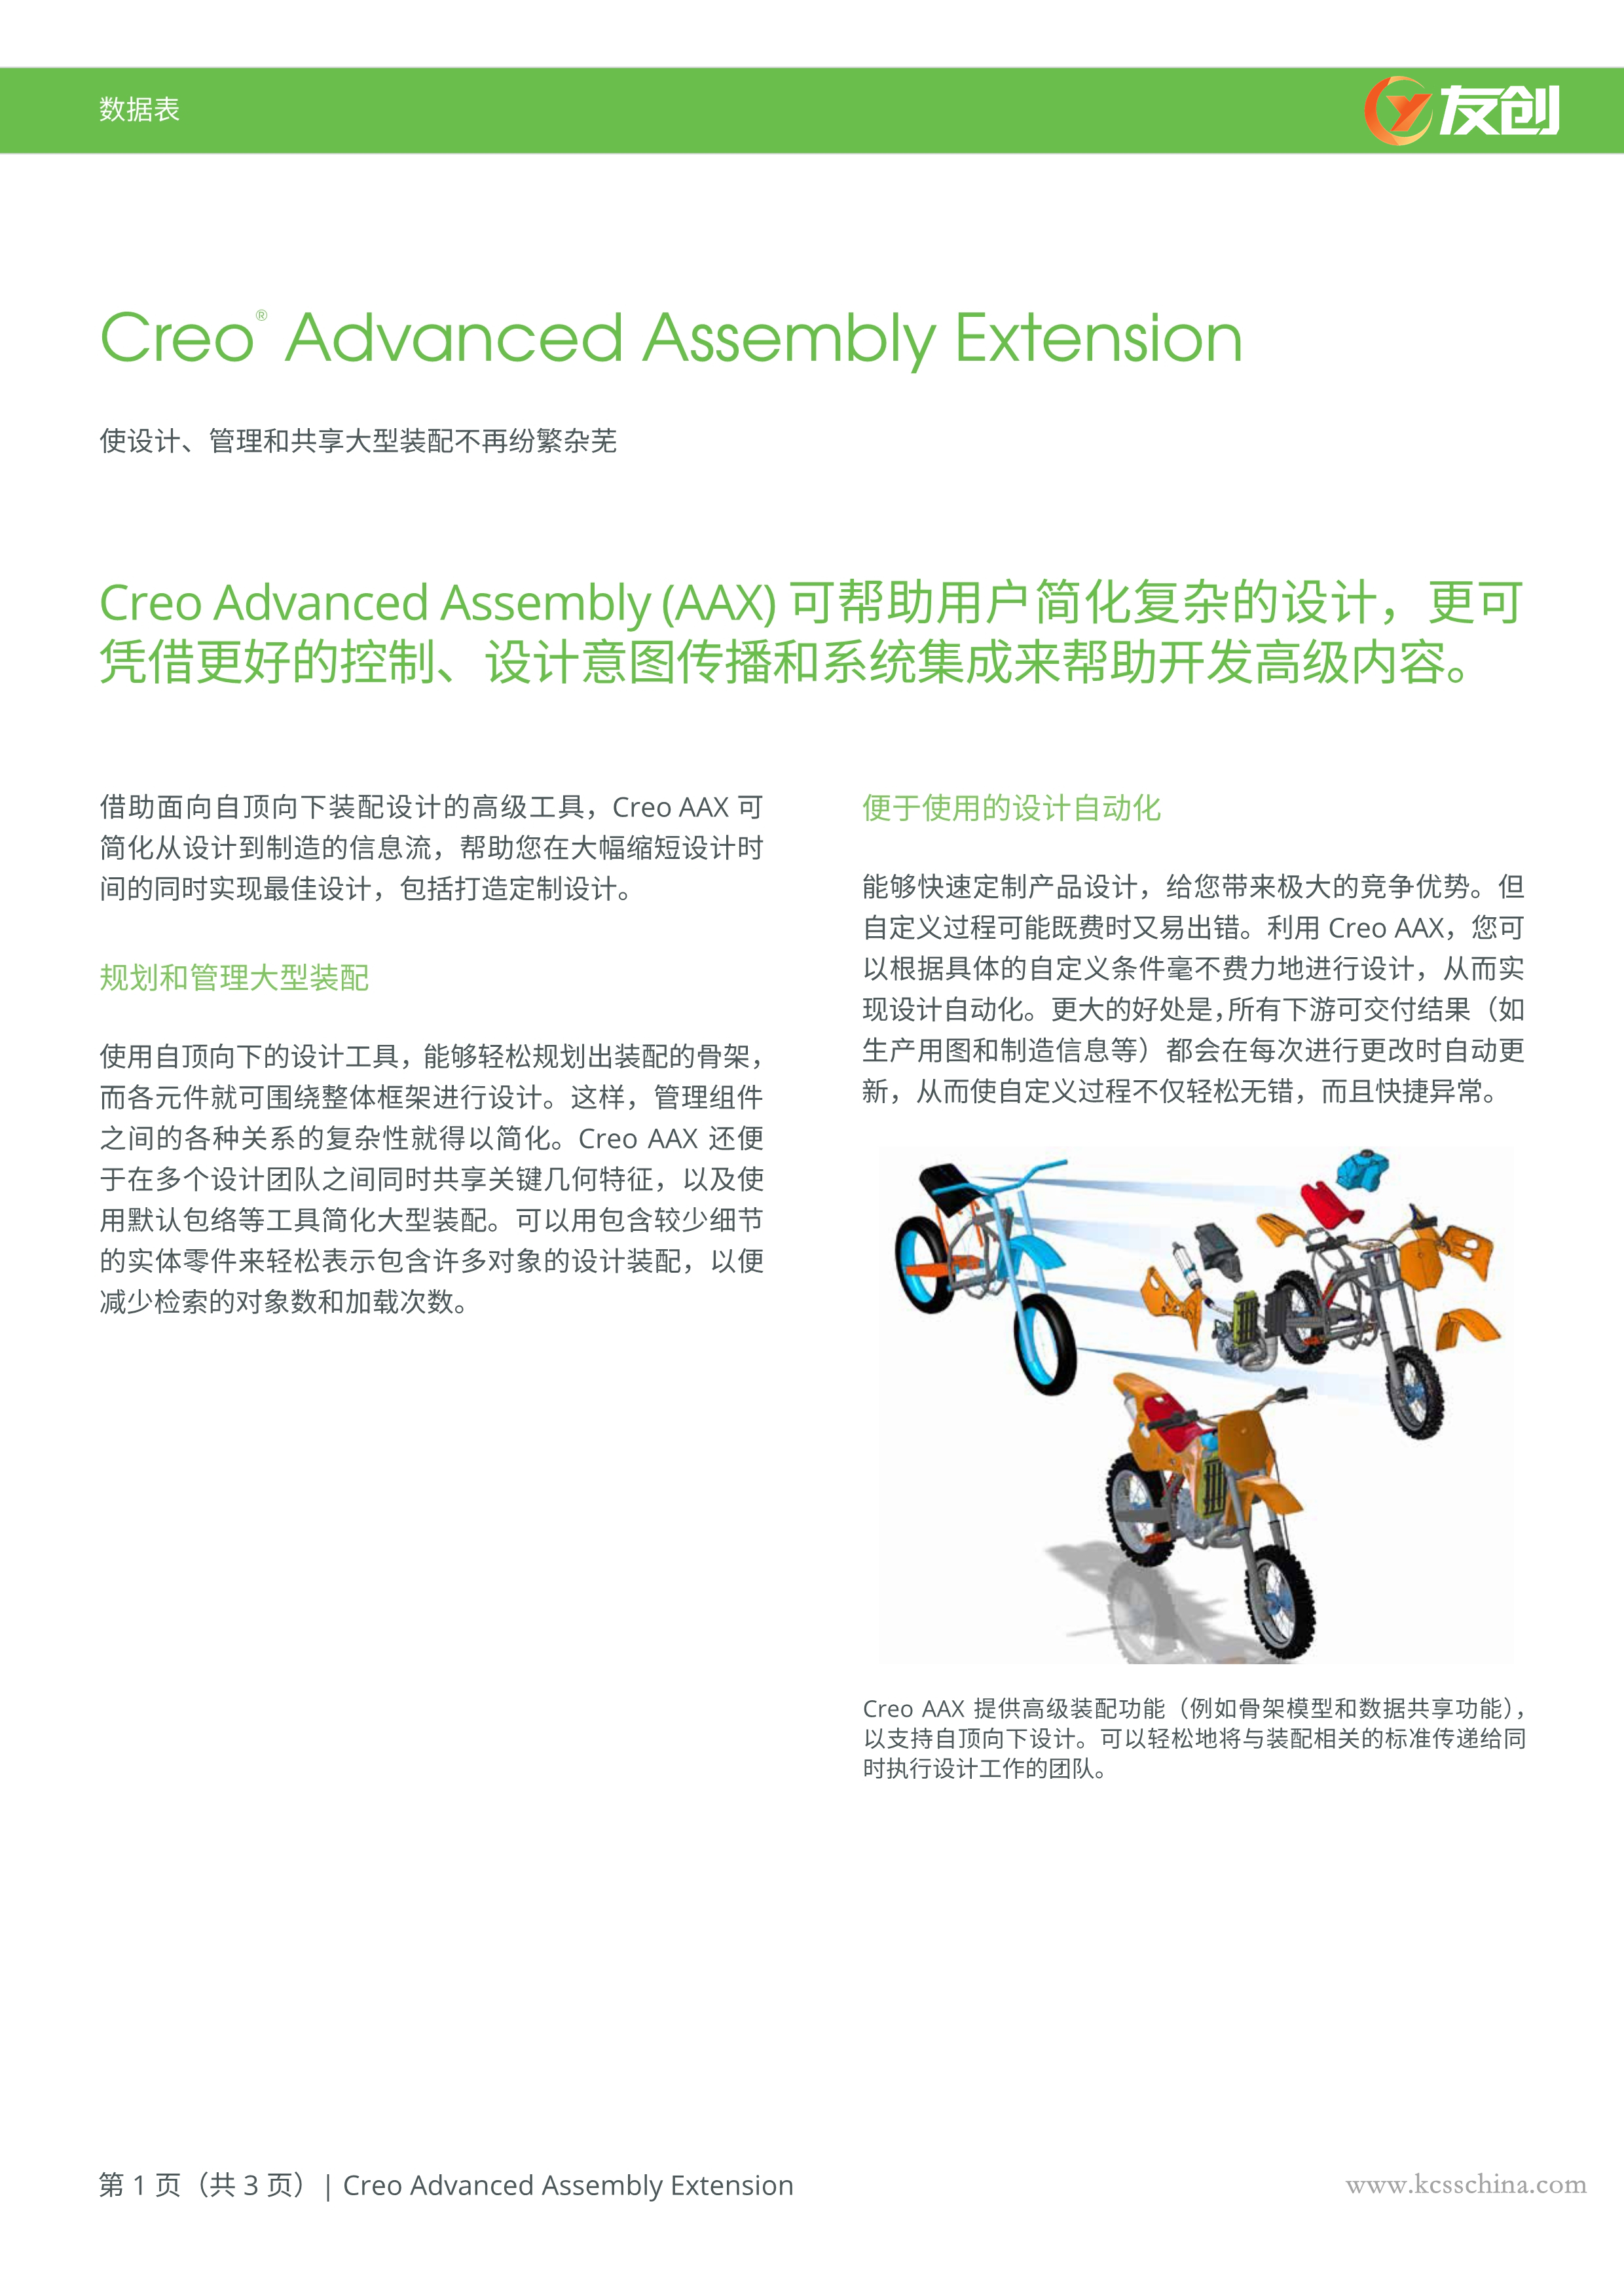 Creo Advanced Assembly Extension Data Sheet (Simplified Chinese)_1_副本.jpg